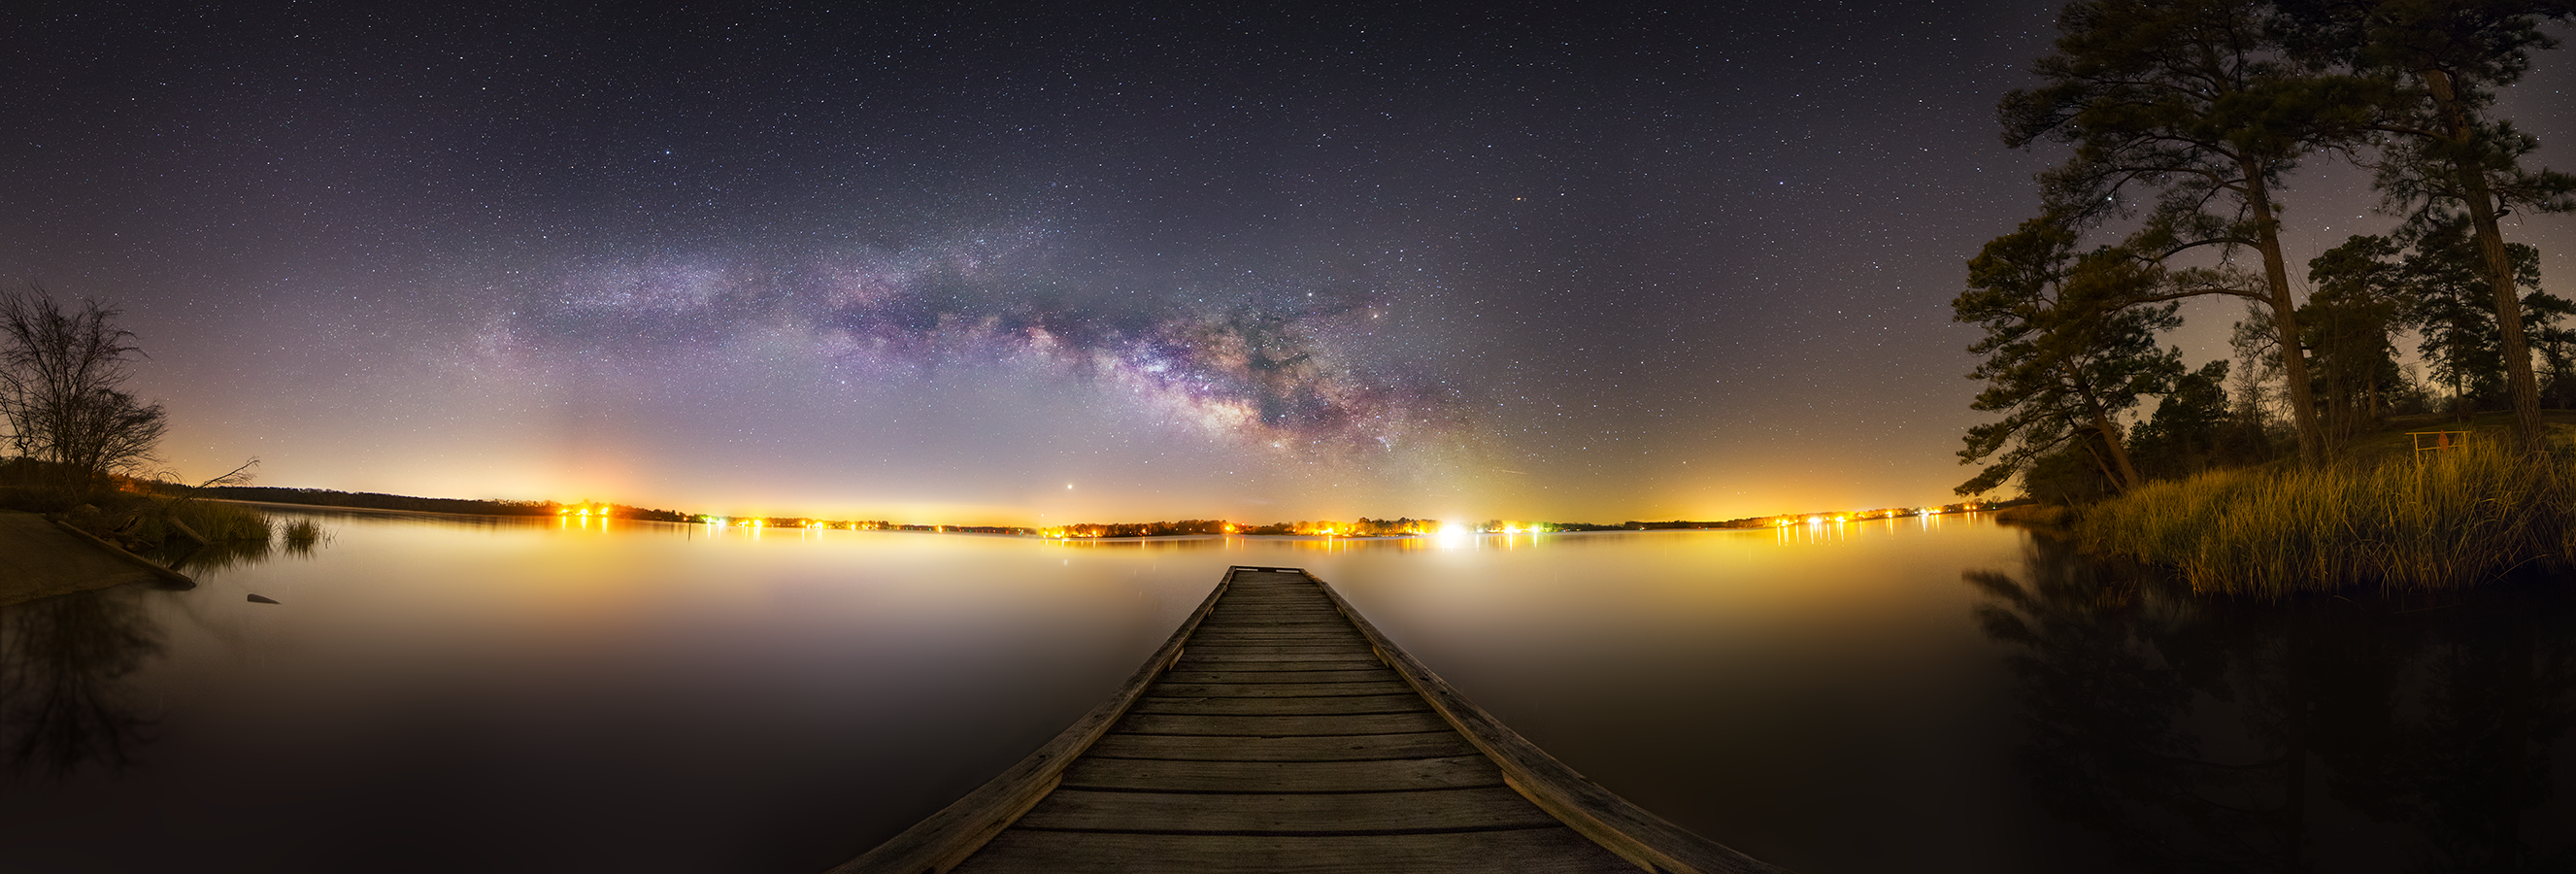 Stargazer Sees Milky Way and 5 Planets Dance in the Night Sky (Photo)